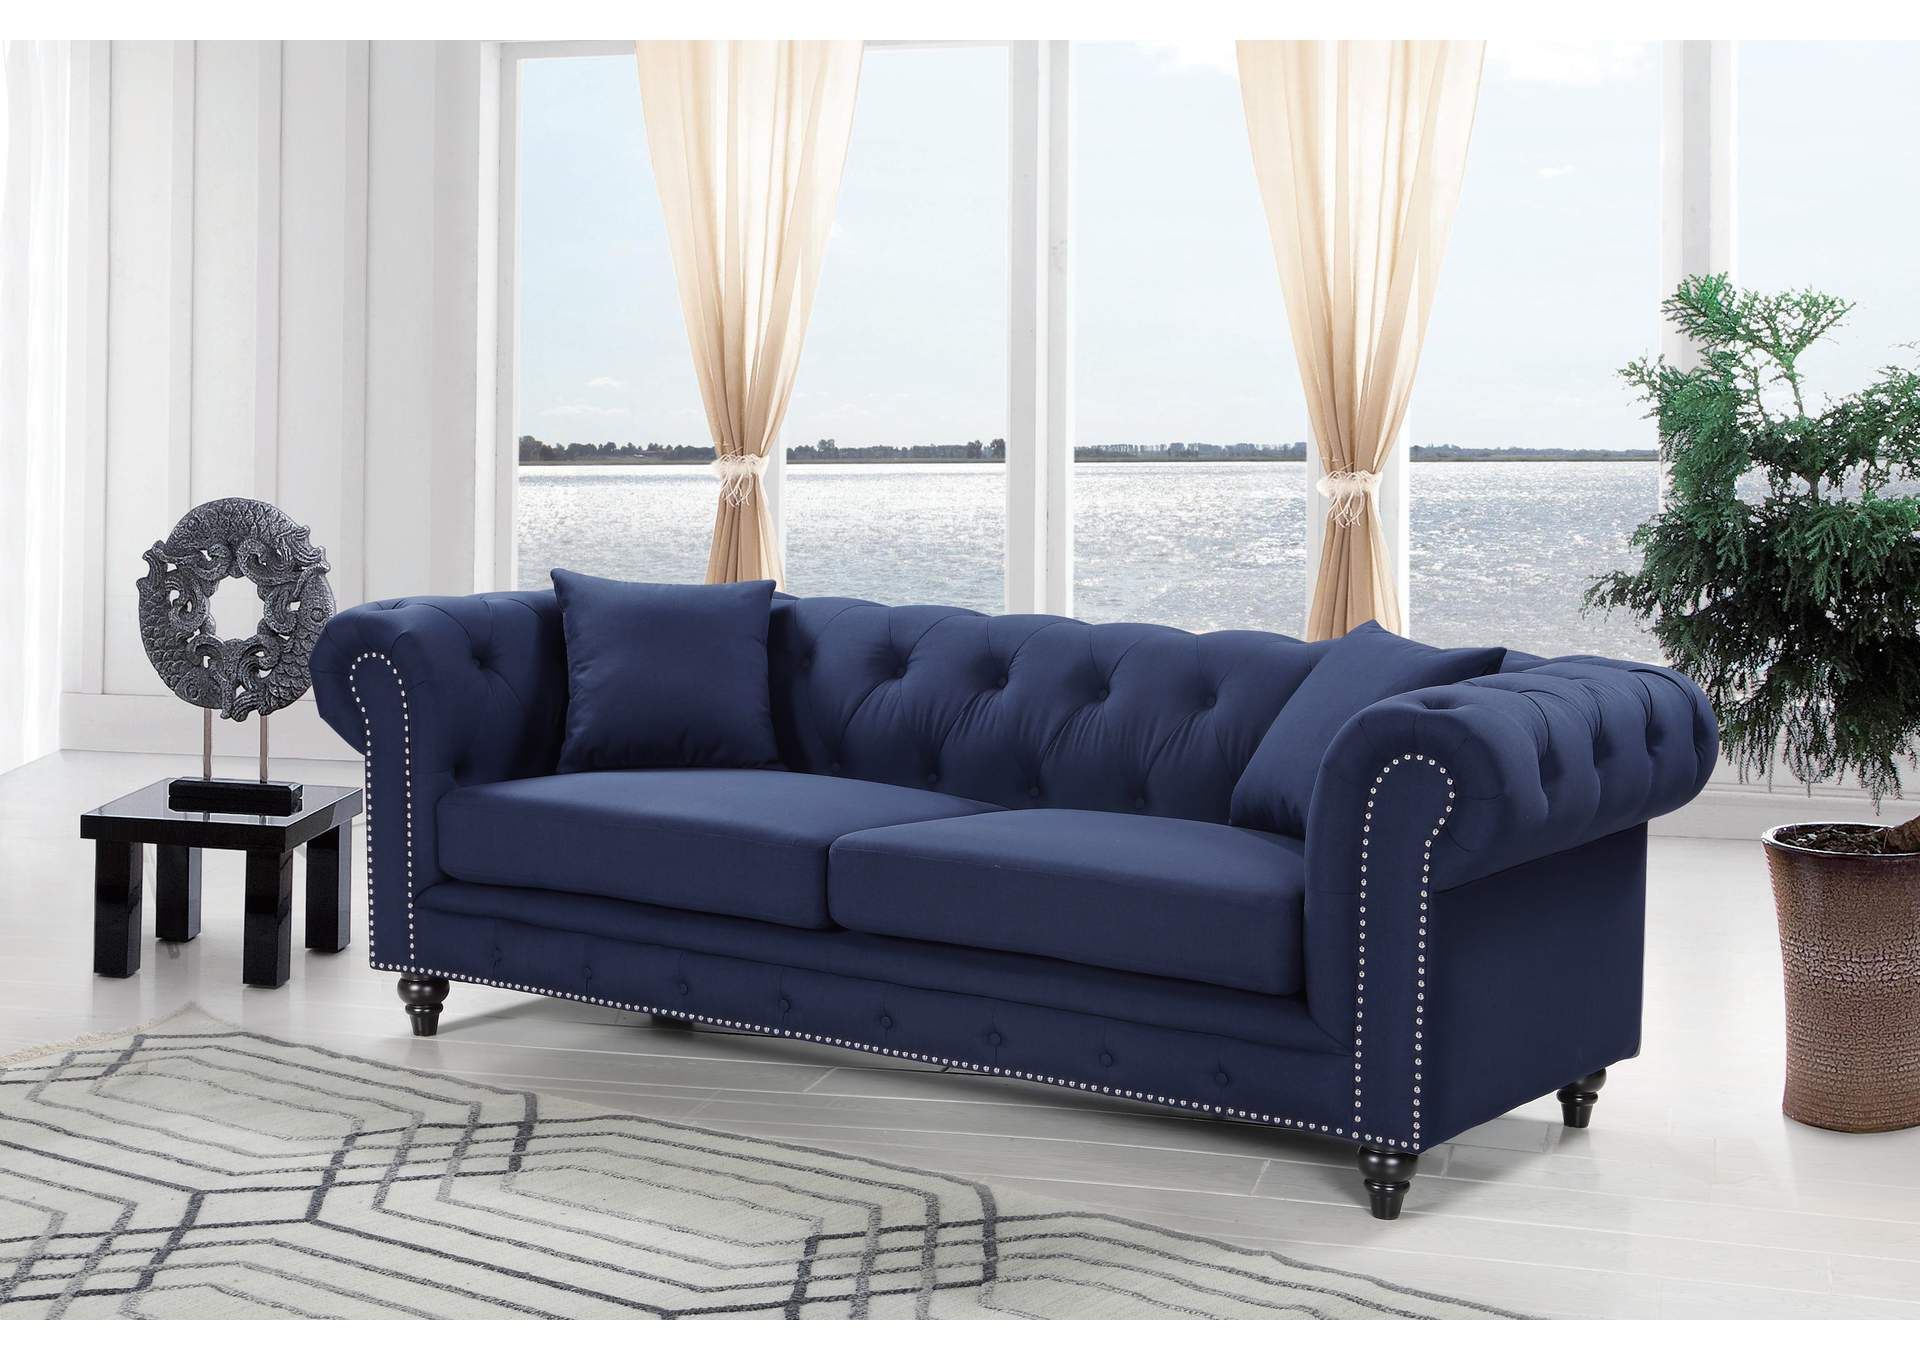 Chesterfield Navy Linen Sofa Best Buy Furniture And Mattress With Navy Linen Coil Sofas (View 4 of 20)